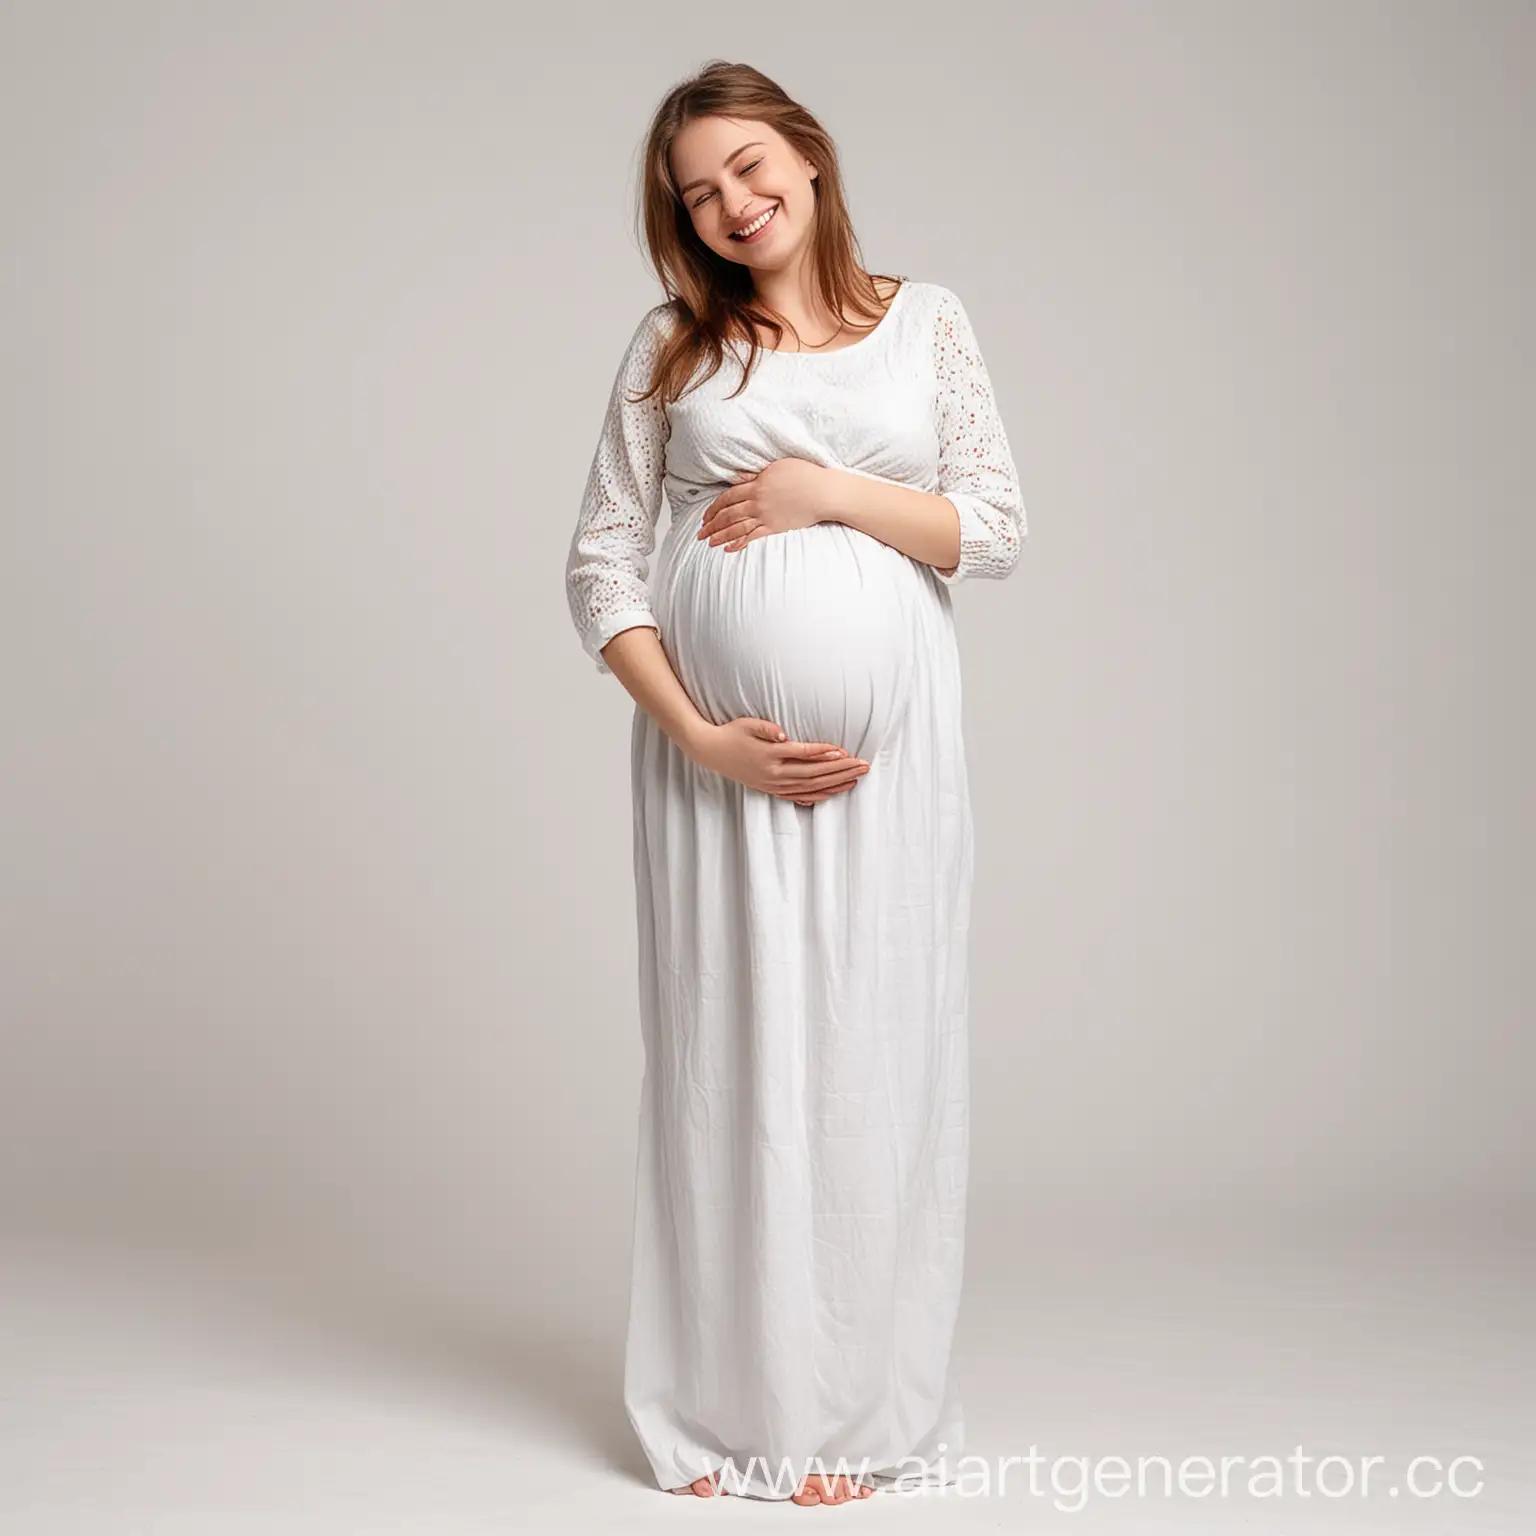 Joyful-Pregnant-Woman-Holding-Her-Belly-on-White-Background